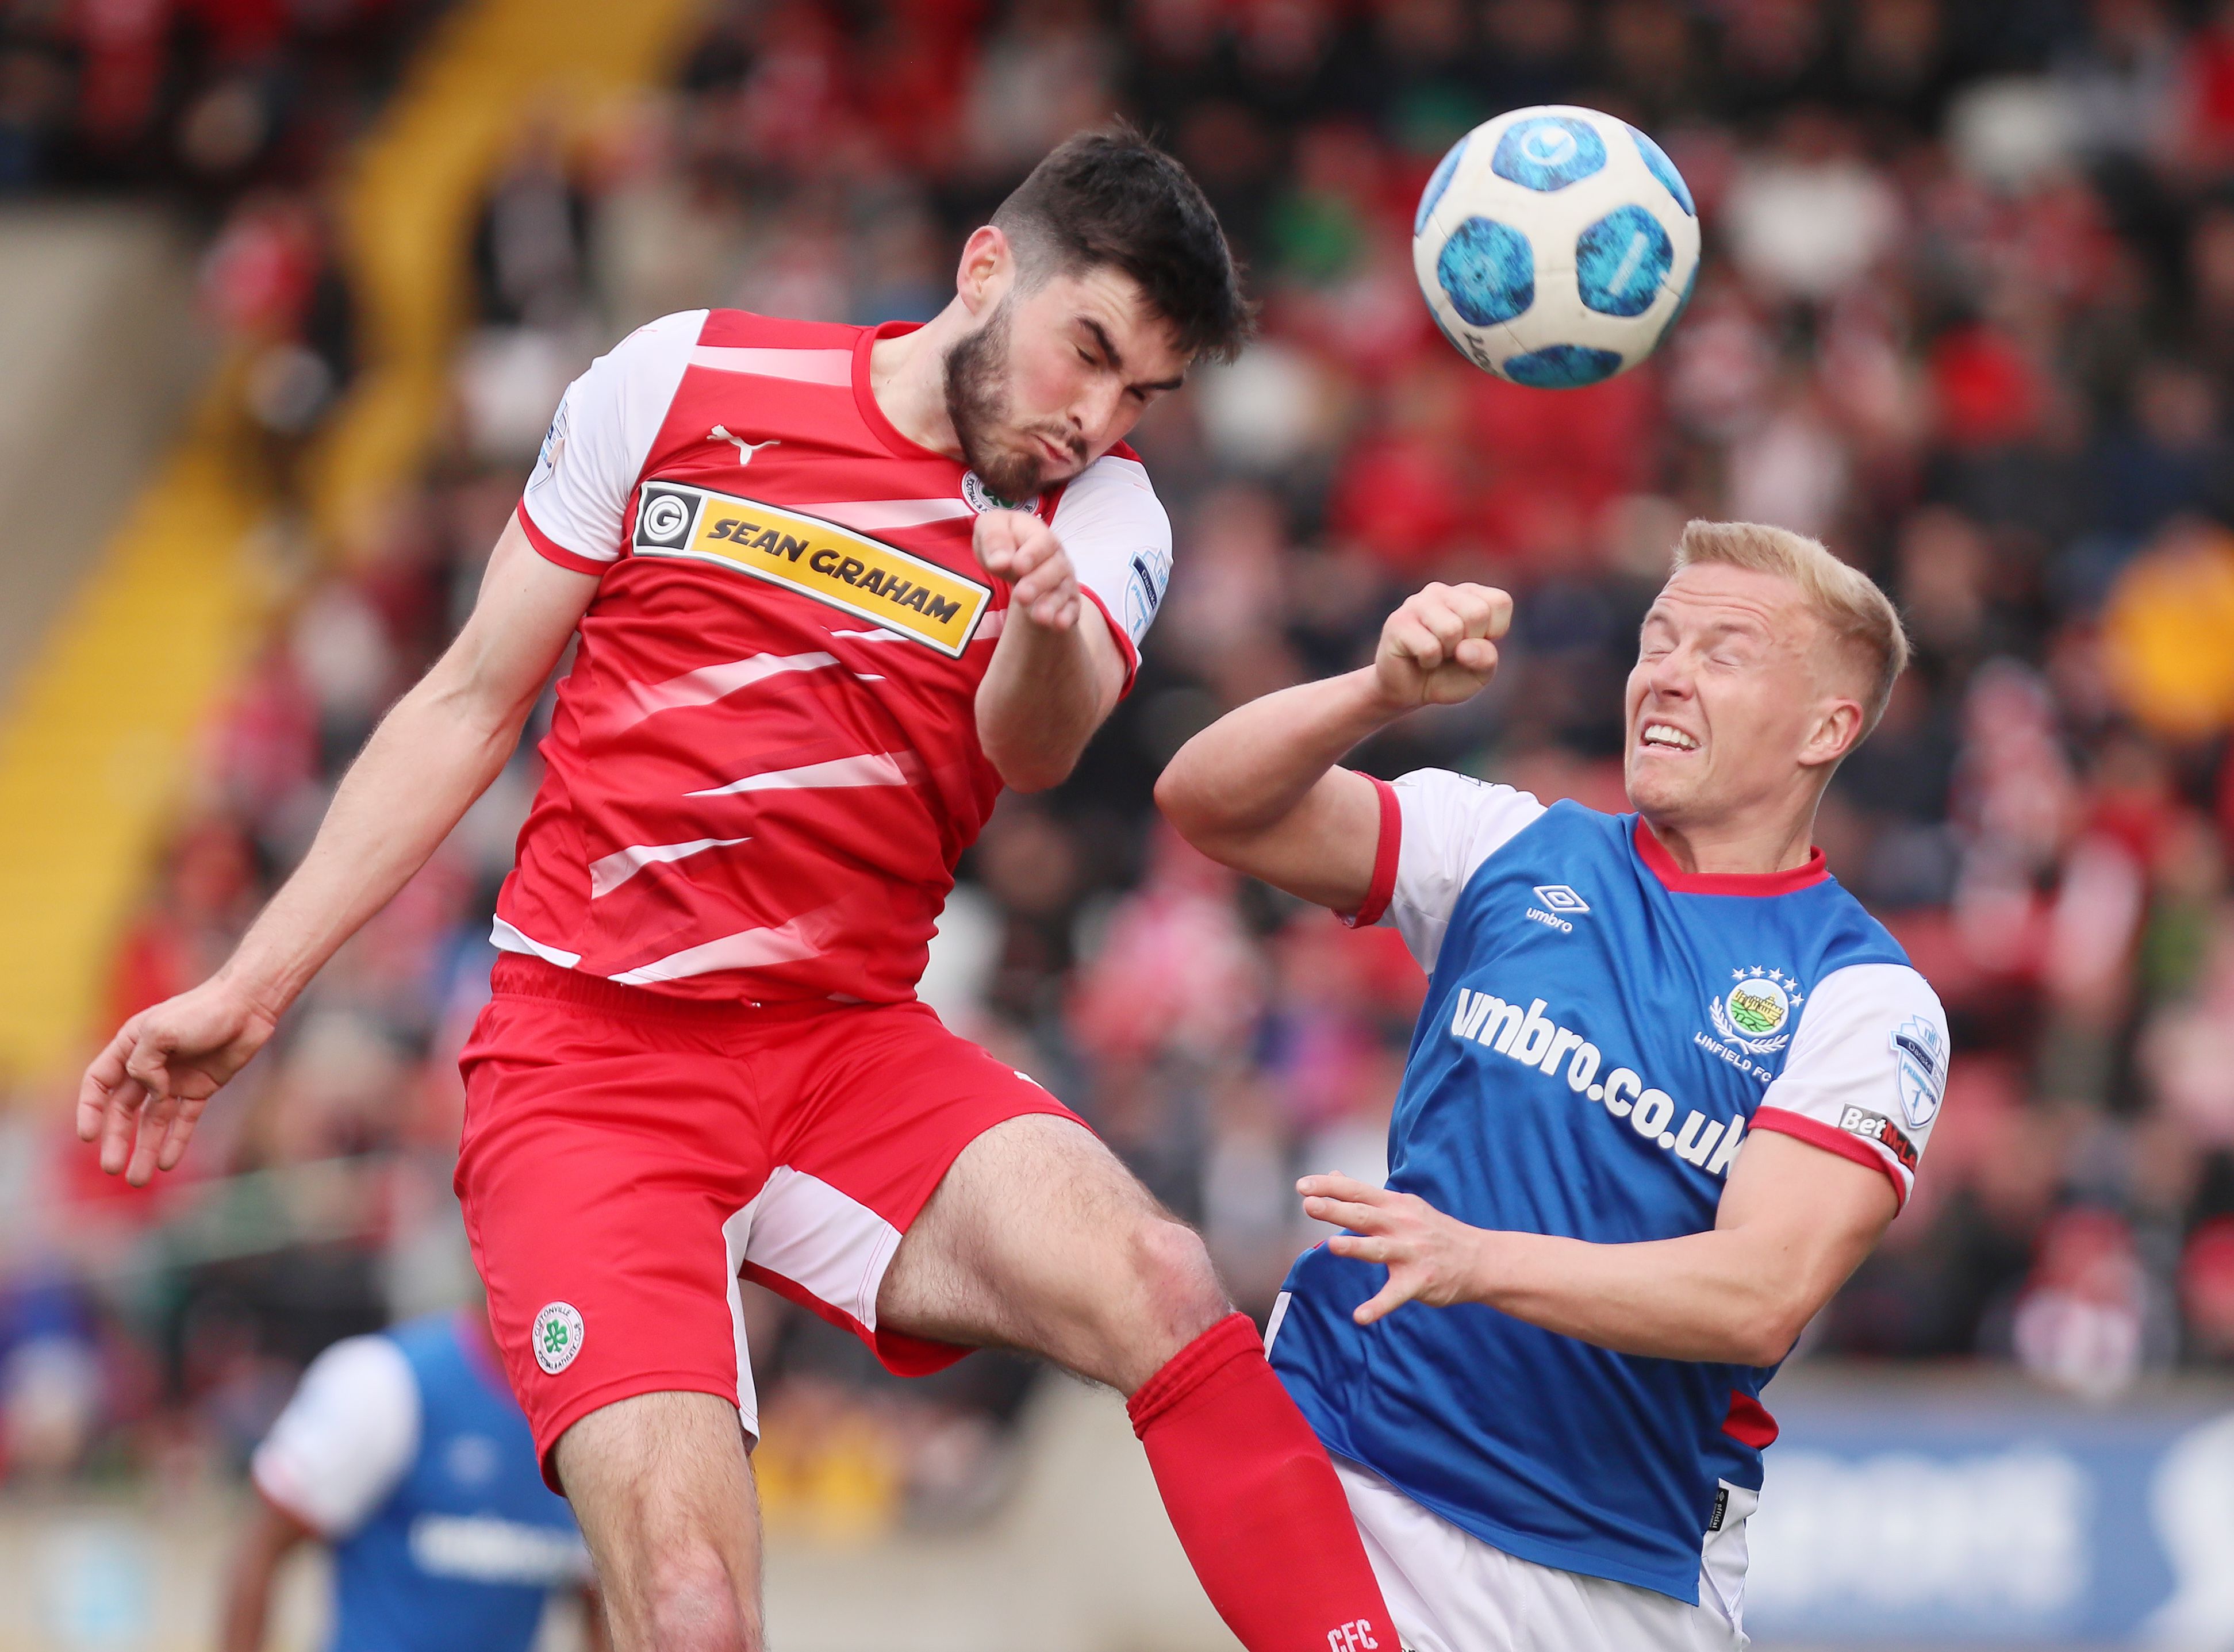 Luke Turner was released by Aberdeen but Cliftonville\' will face competition to make last season\'s loan signing a permanent fixture at Solitude